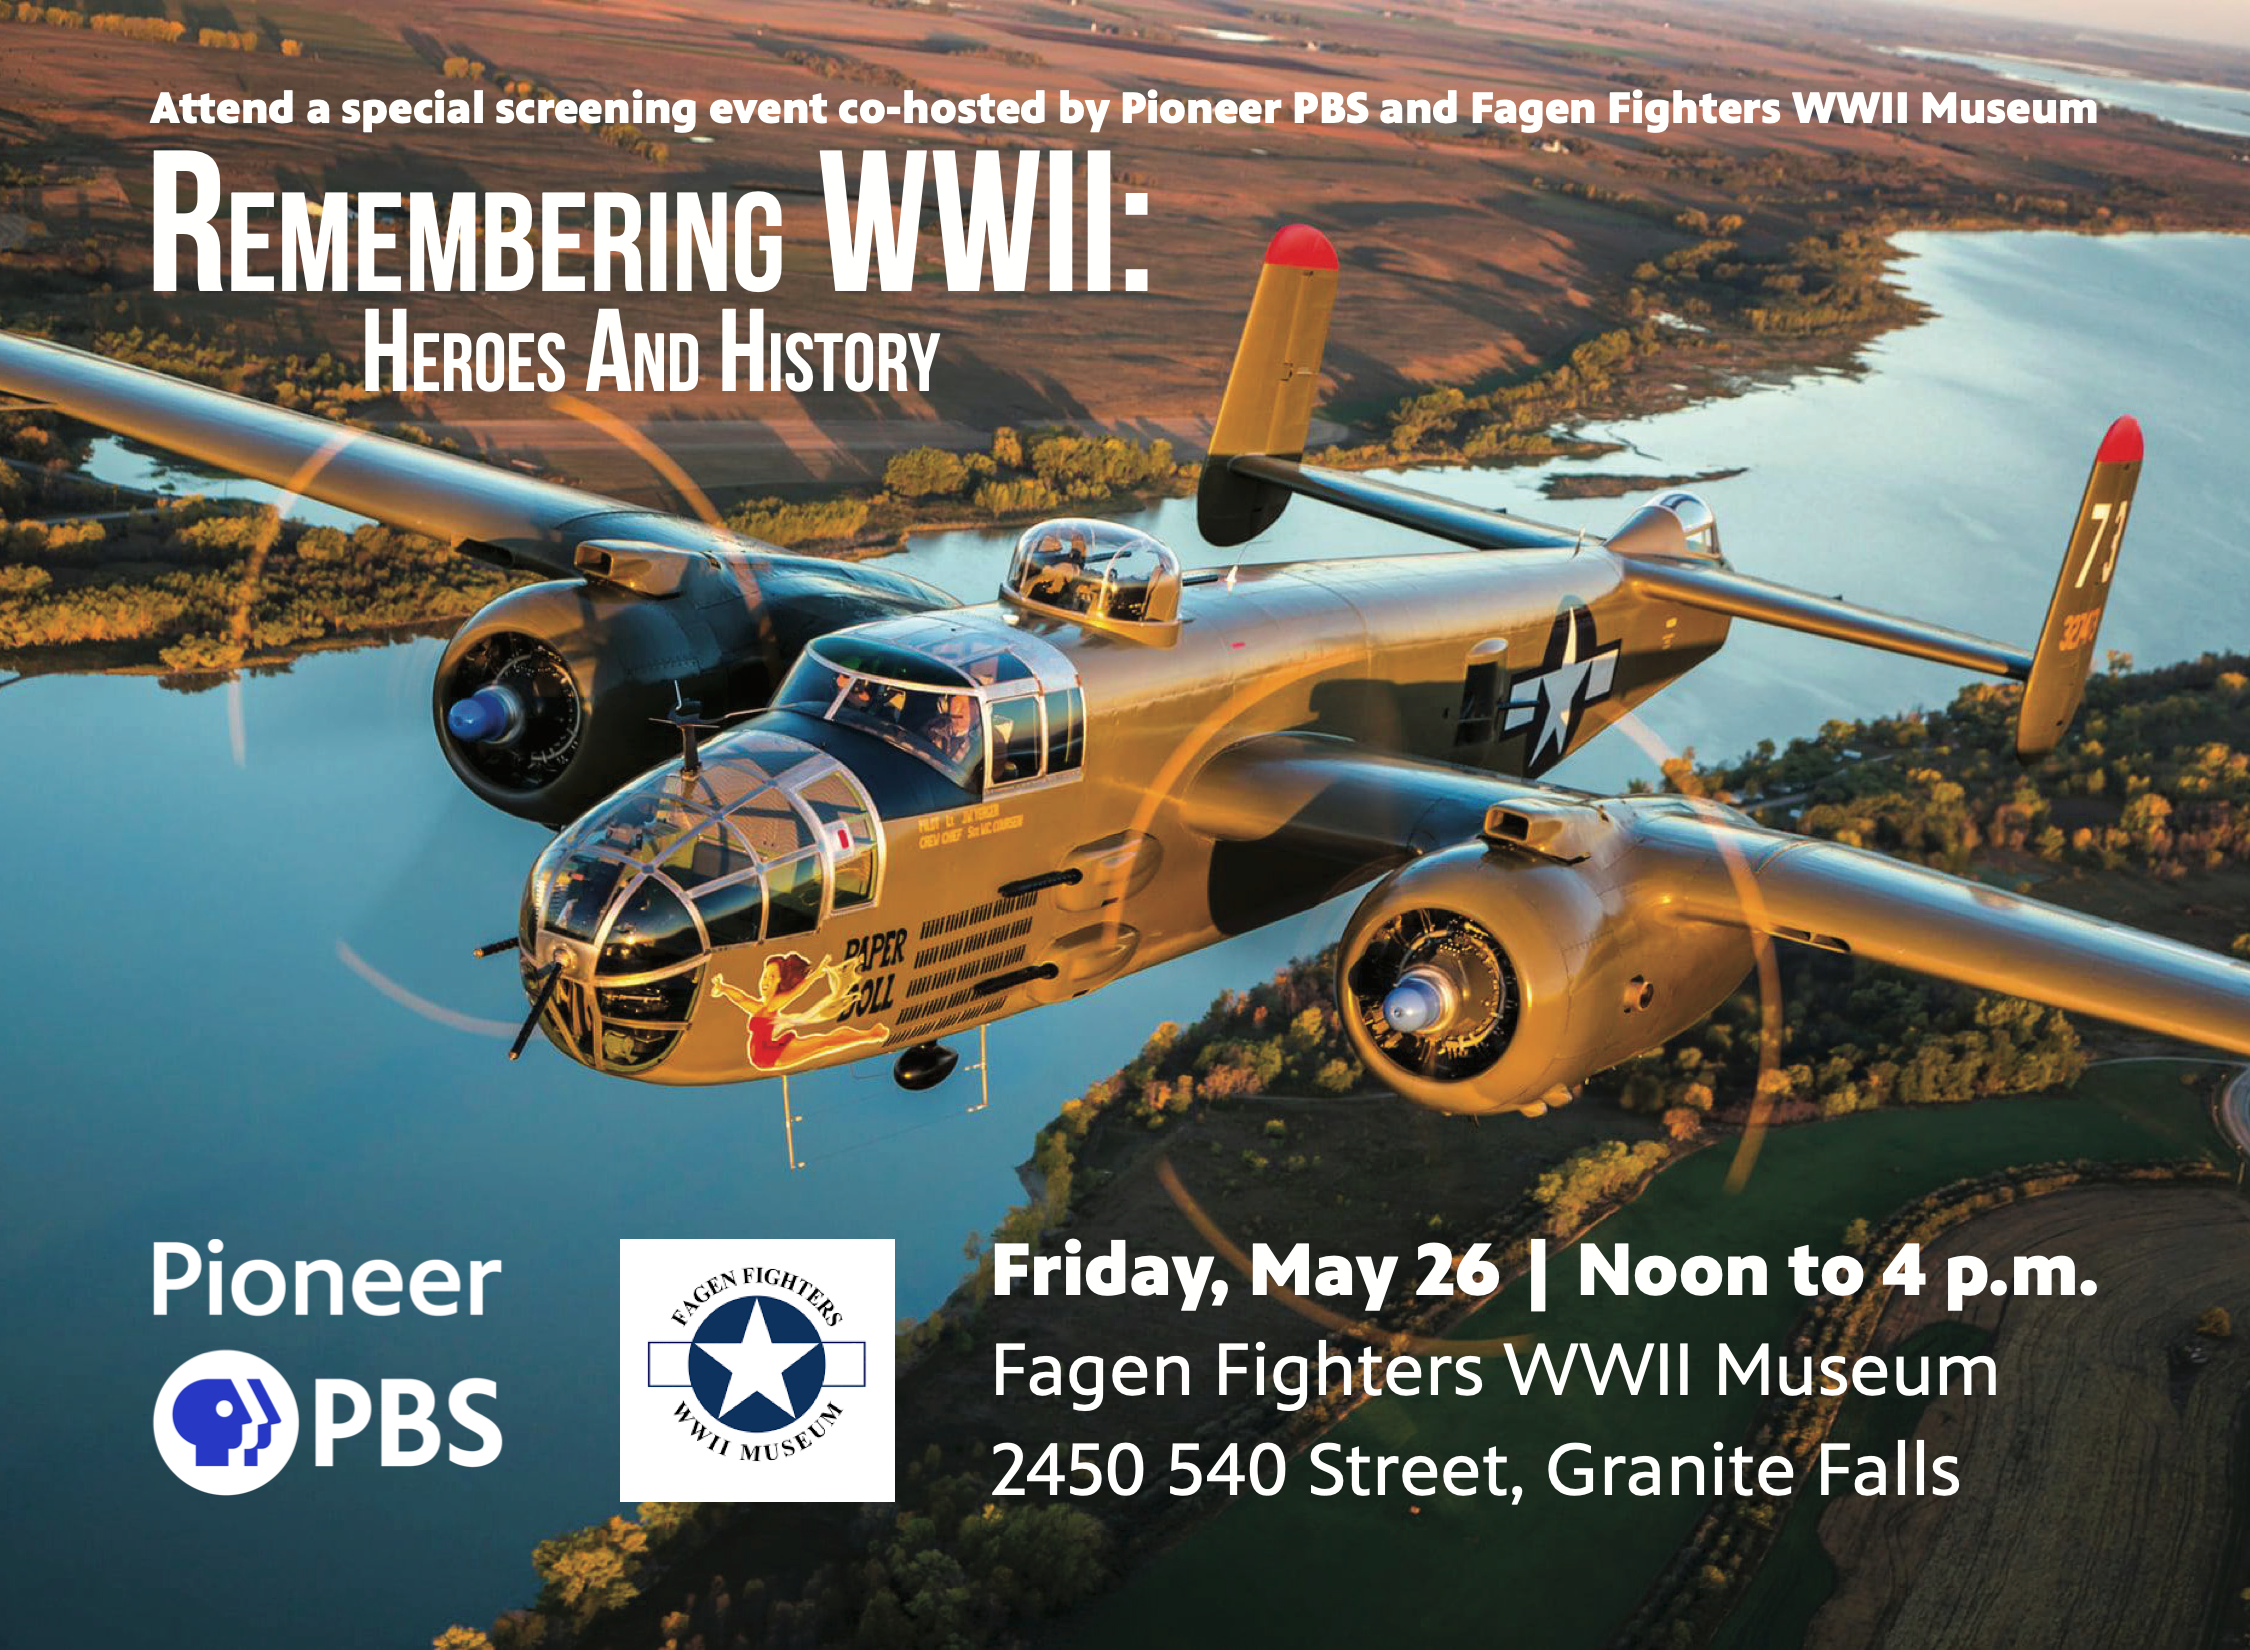 Remembering WWII: Heroes and History screening event on May 26